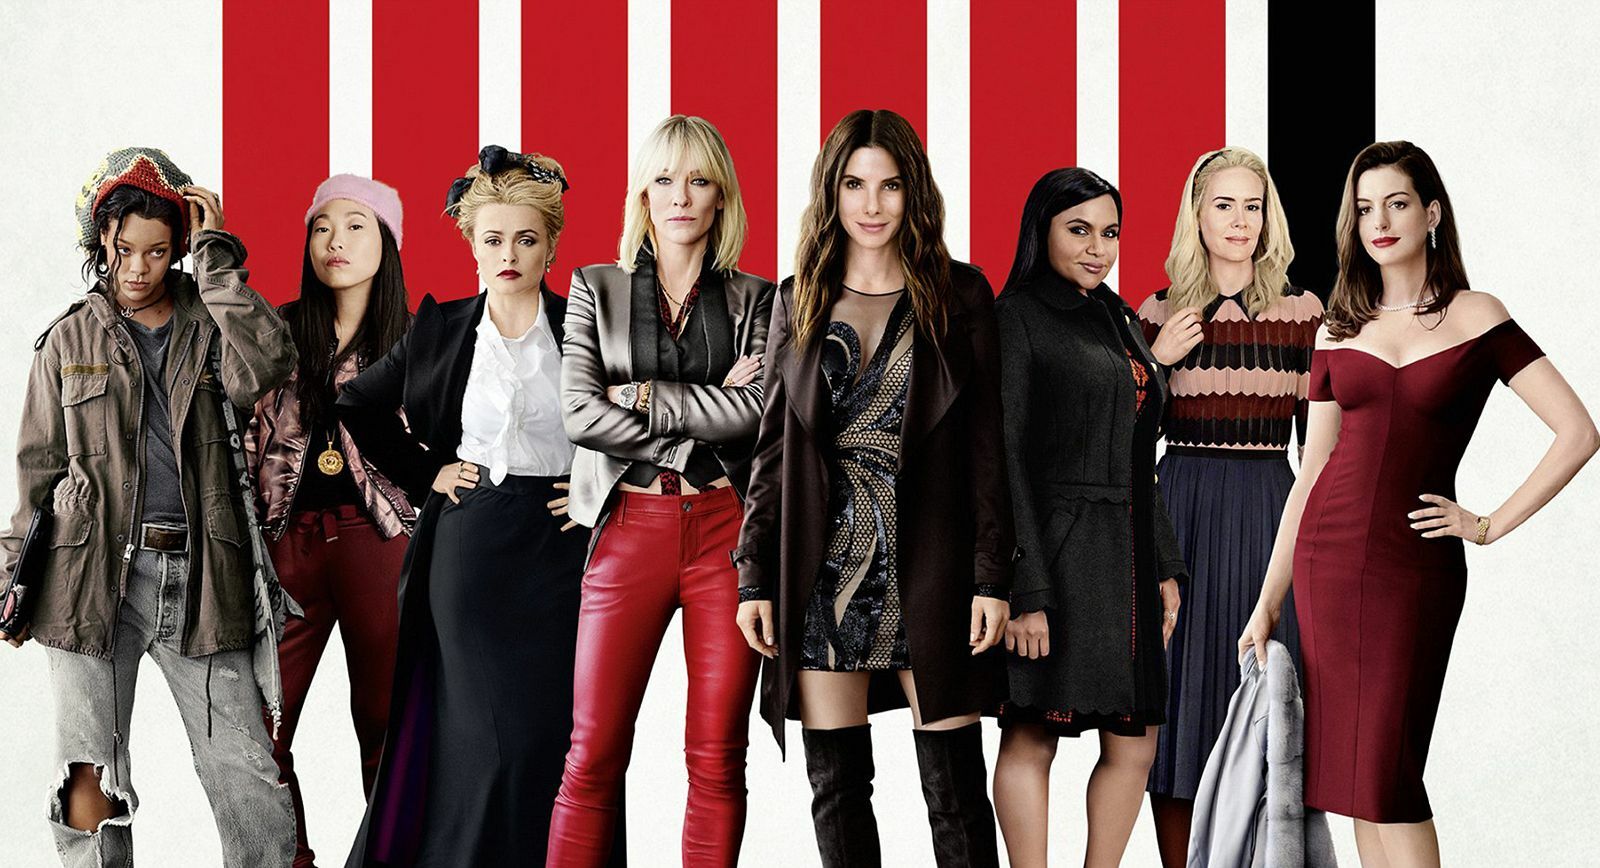 The cast of Ocean's 8 courtesy of Warner Bros. Pictures